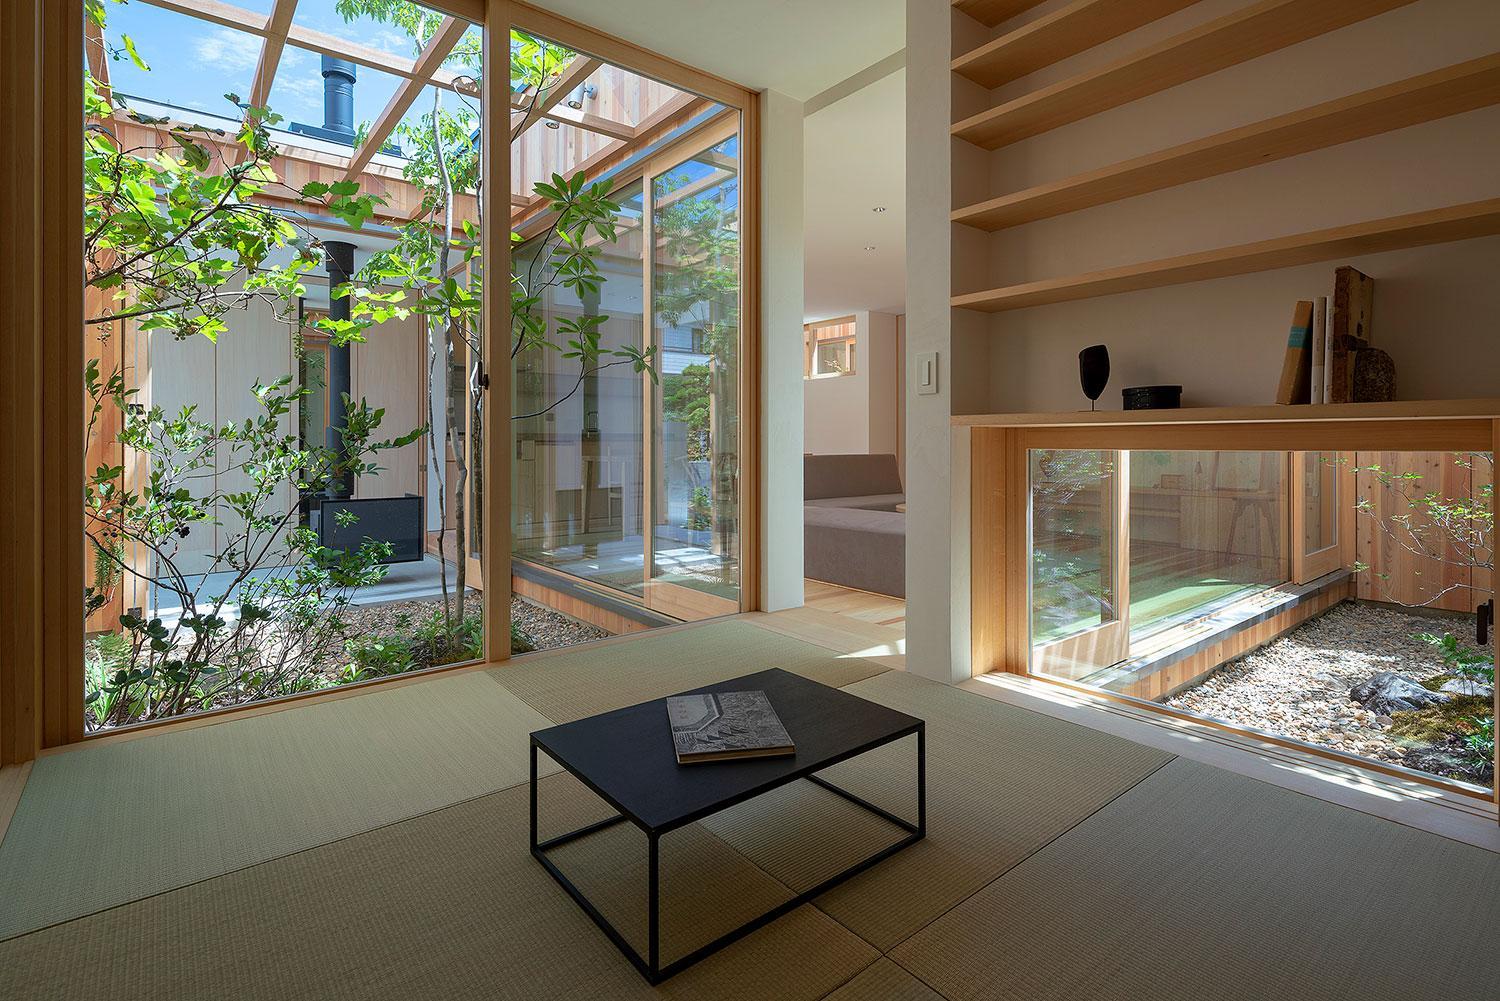 Experience the Beauty of All Four Seasons in this Wooden Bungalow in Japan